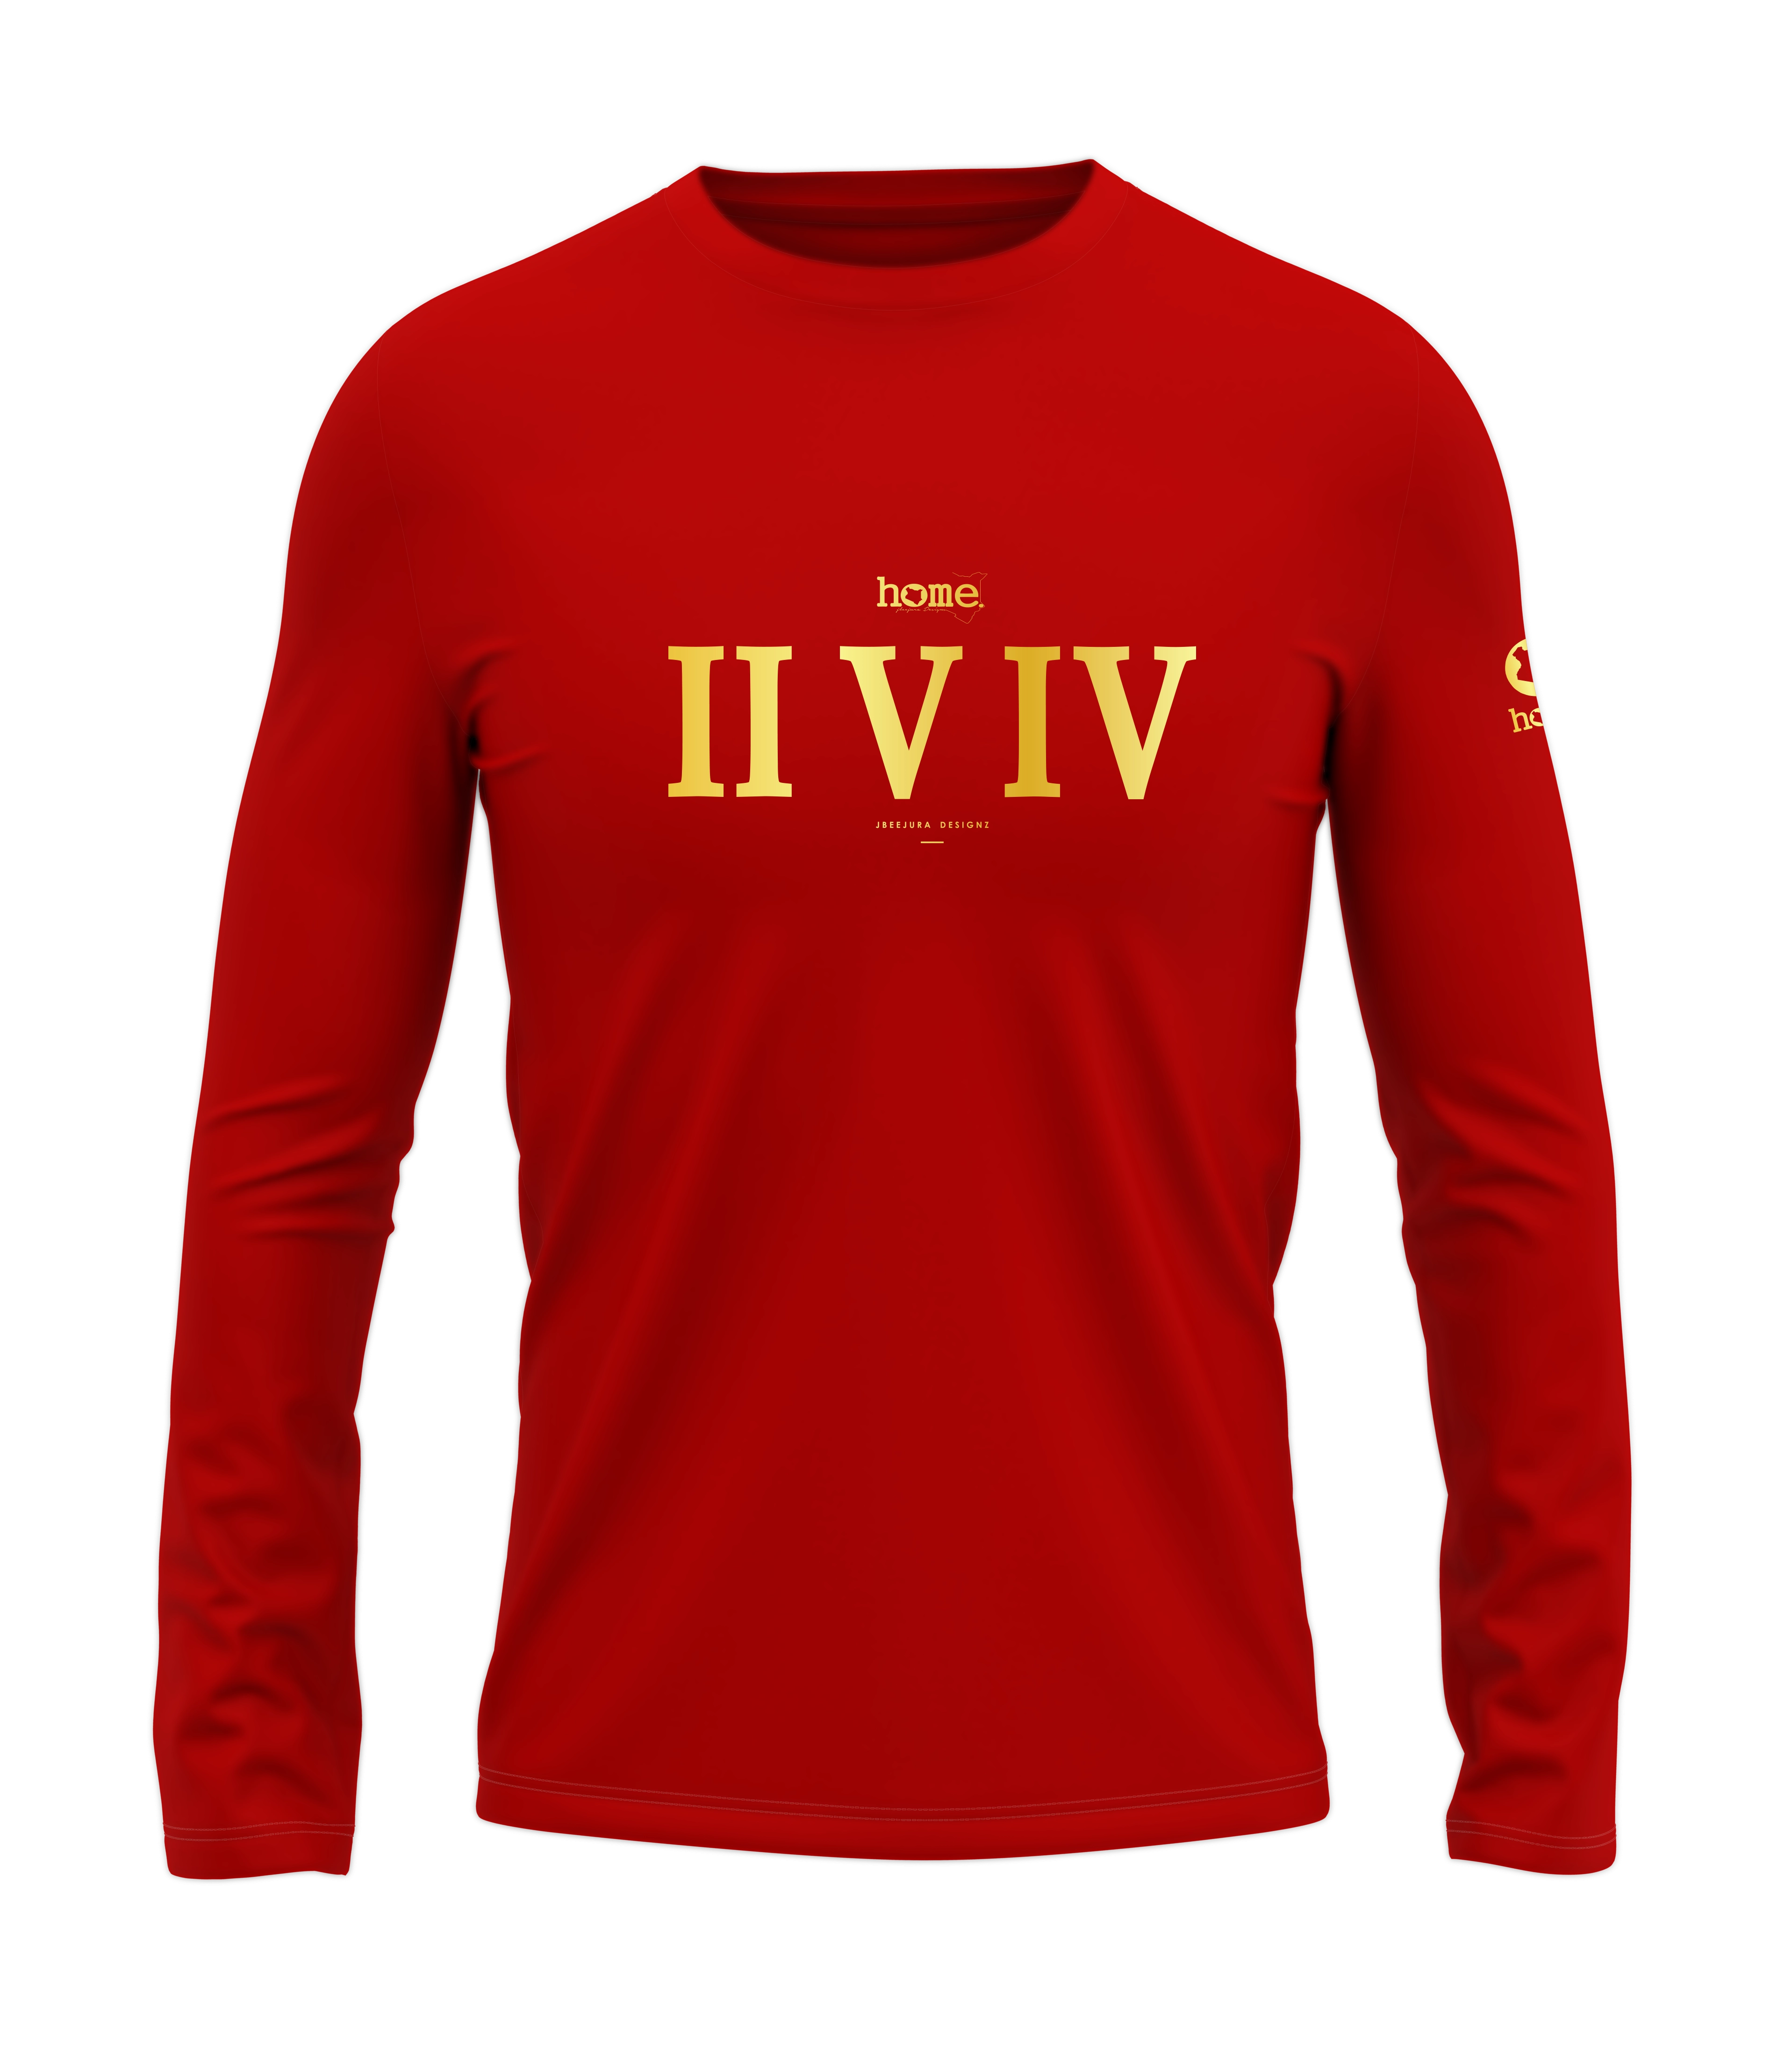 home_254 LONG-SLEEVED RED T-SHIRT WITH A GOLD ROMAN NUMERALS PRINT – COTTON PLUS FABRIC